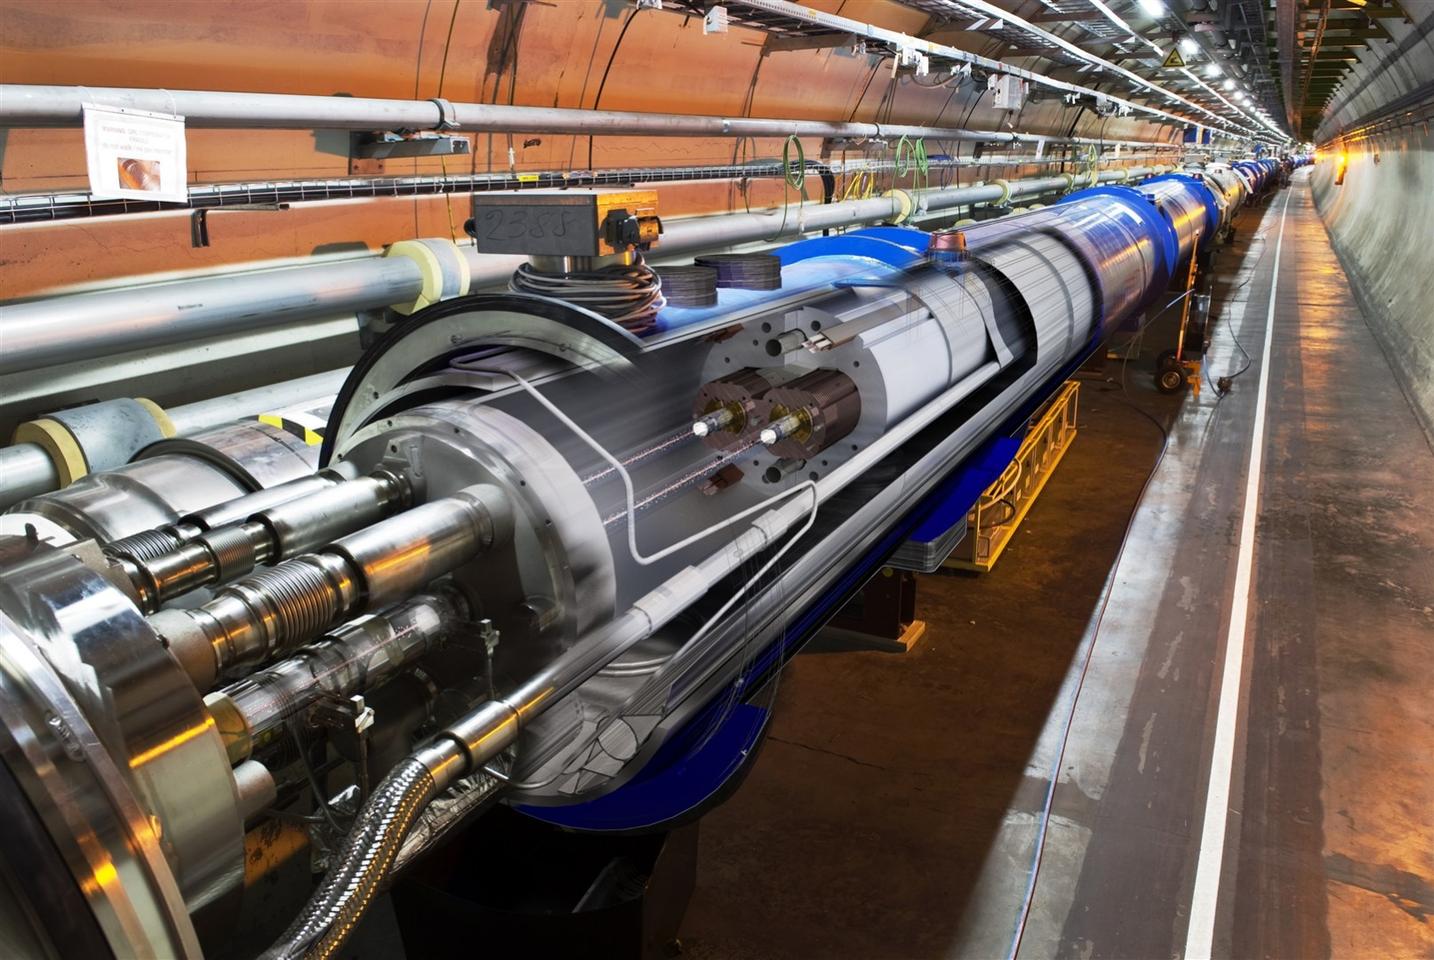 A 3D cross-section view of the Large Hadron Collider